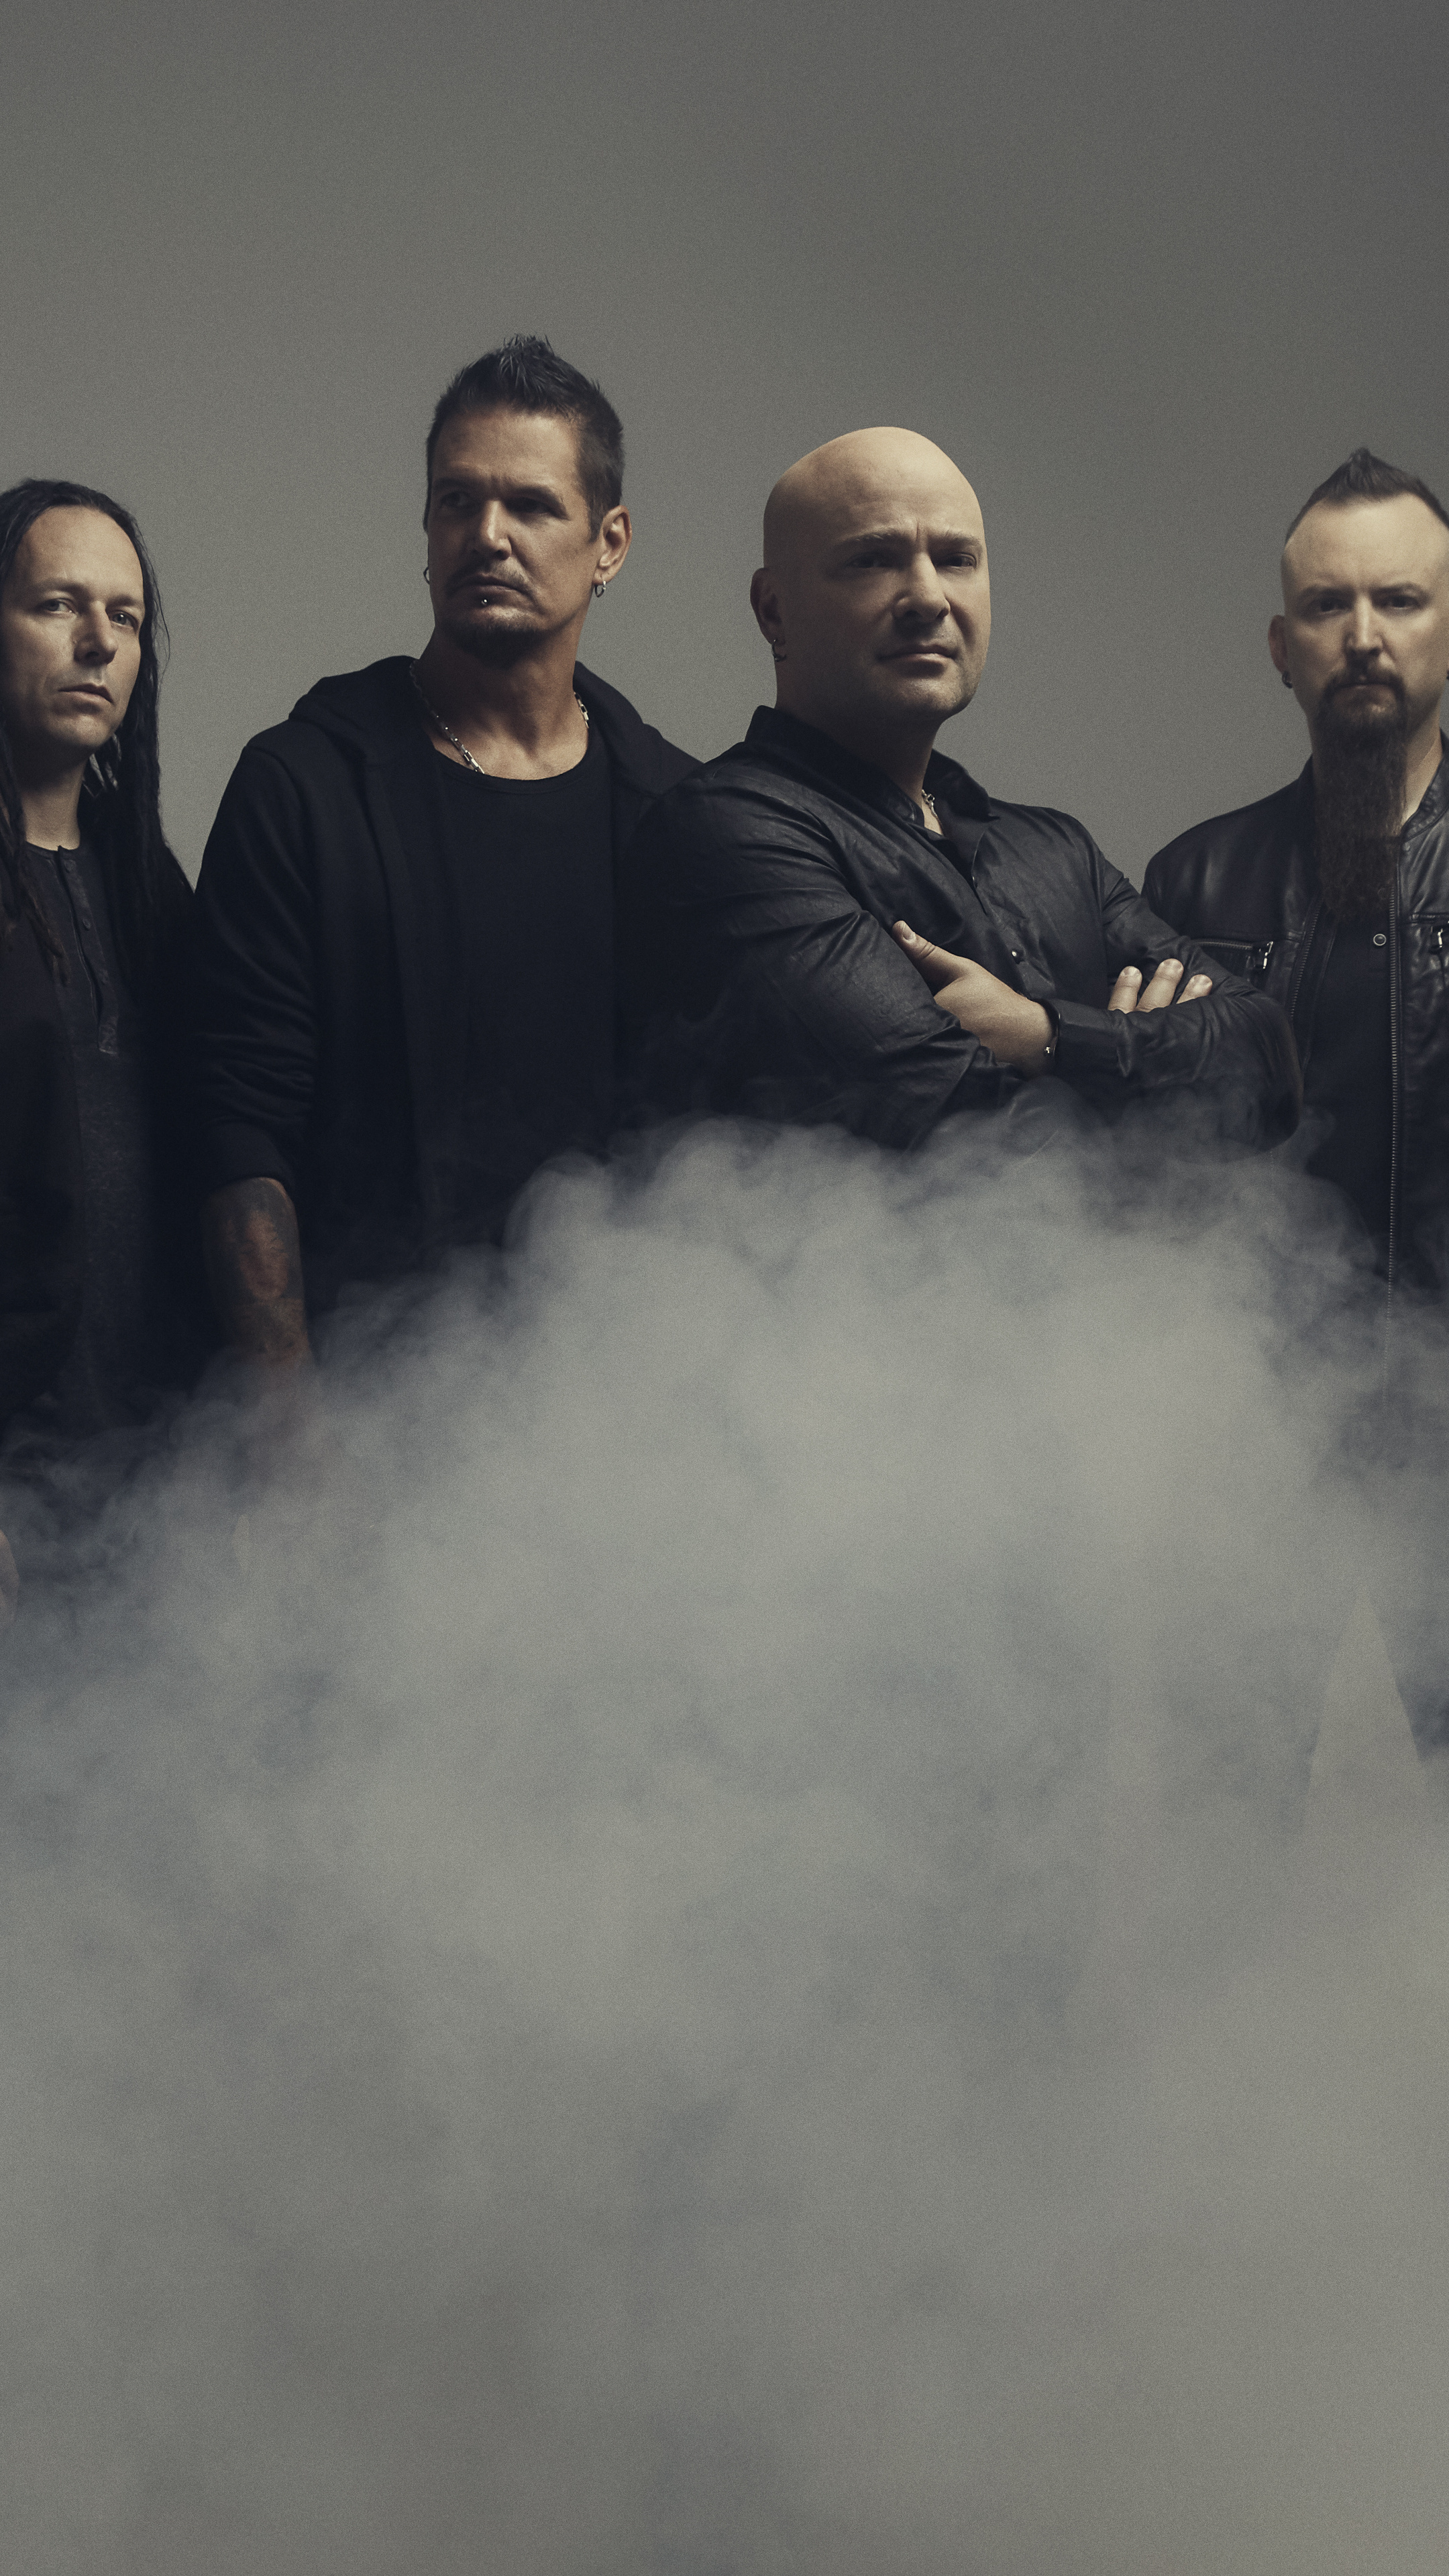 Music Band: Disturbed, An American heavy metal group from Chicago, David Draiman, John Moyer, Mike Wengren. 2160x3840 4K Background.